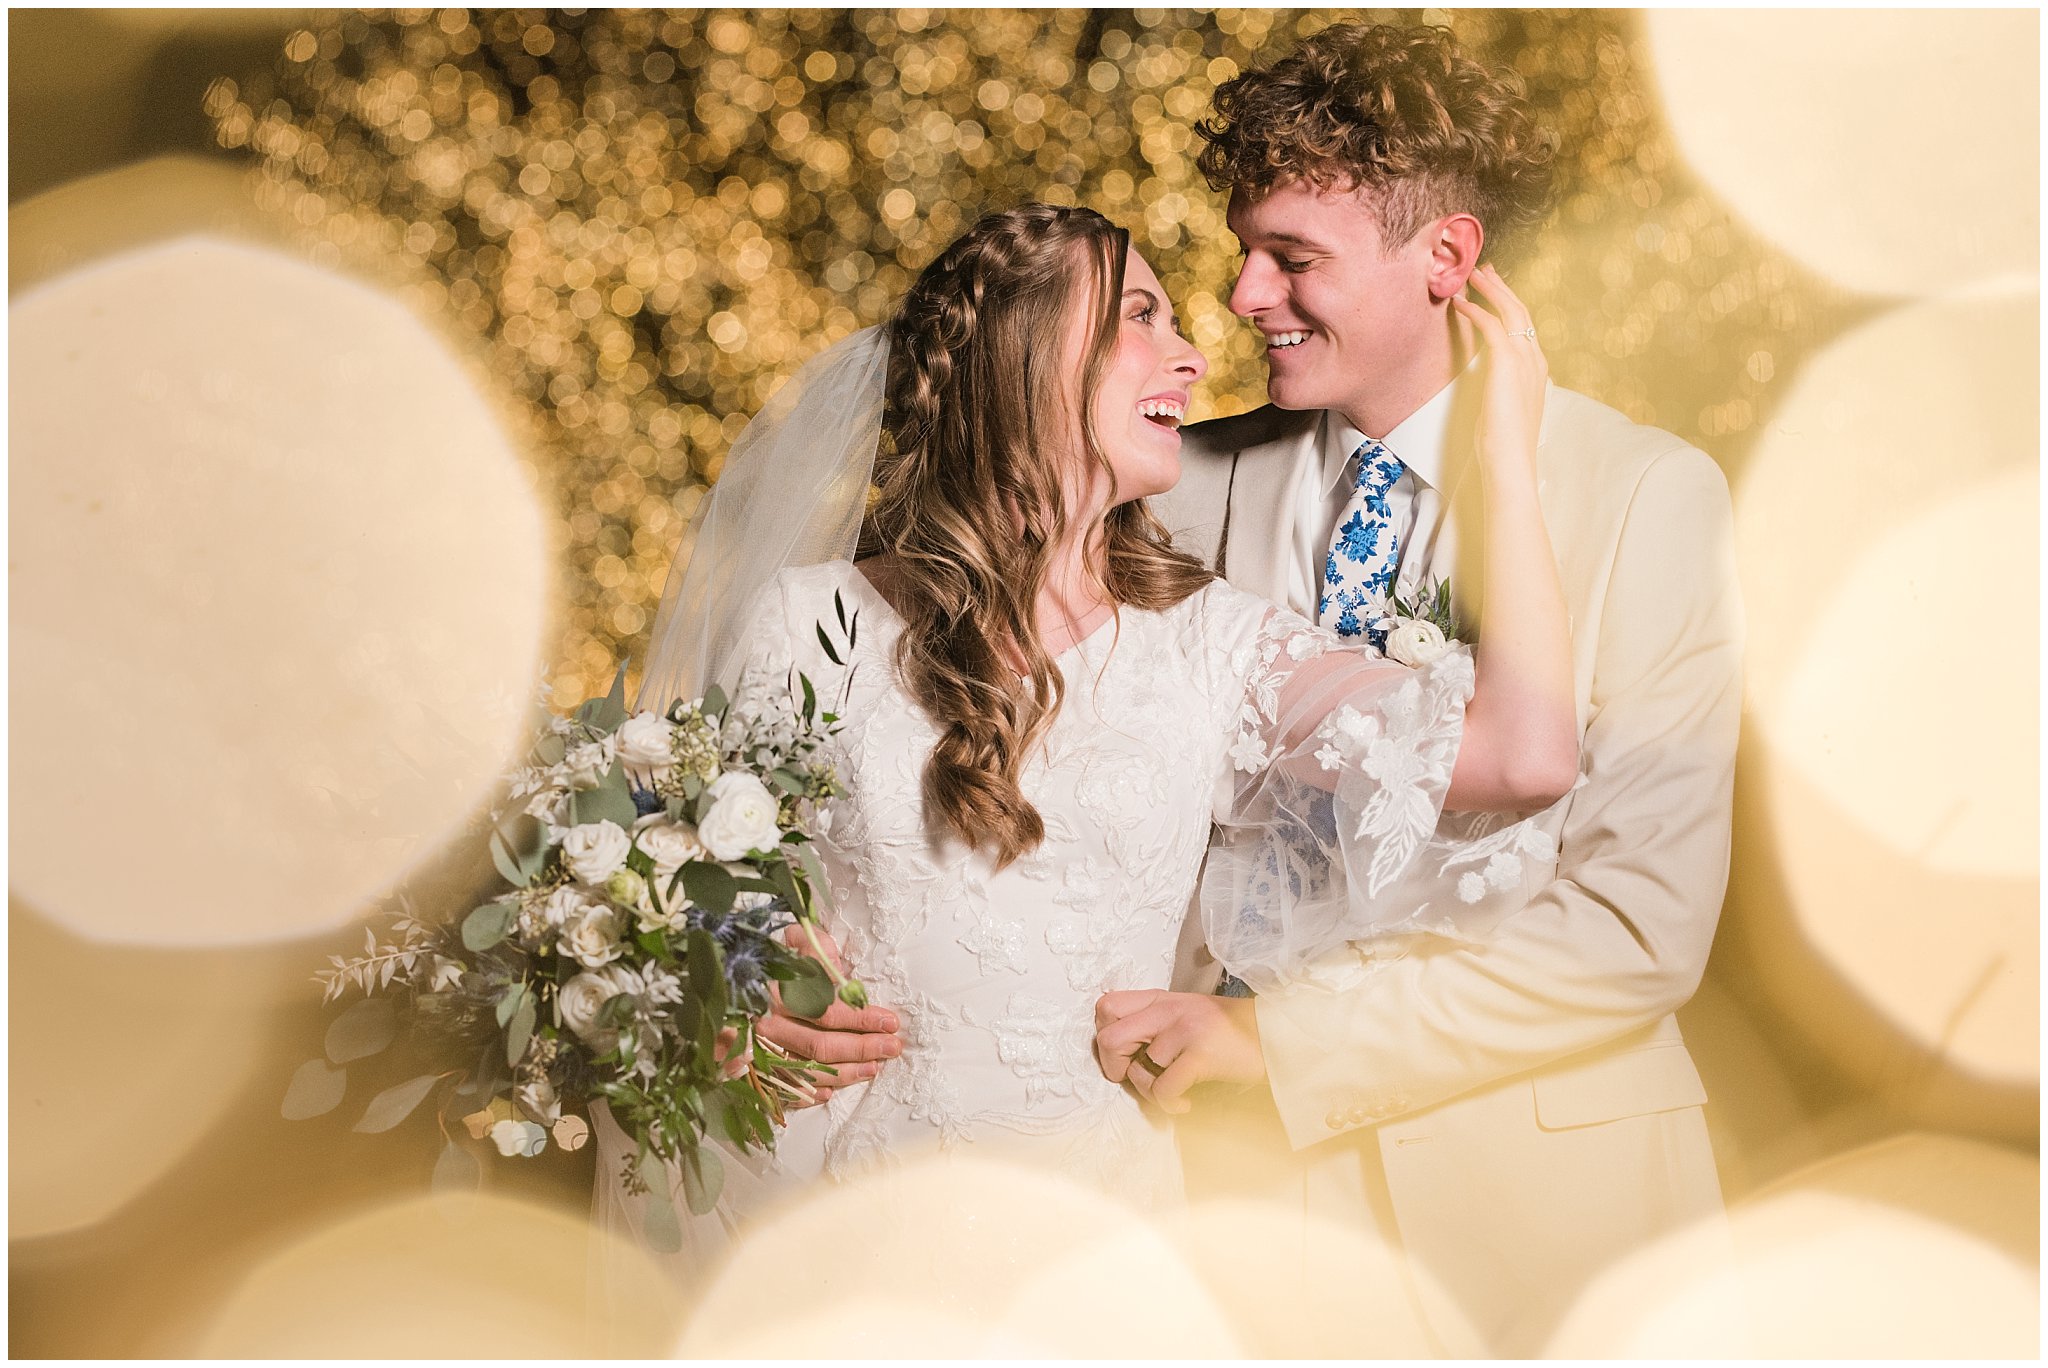 Bride and groom portraits with Christmas lights at the Tree of Life at Draper Park. Groom in cream colored suit with blue floral tie and bride with lace dress and white floral bouquet. | Oquirrh Mountain Temple and Draper Day Barn Winter Wedding | Jessie and Dallin Photography